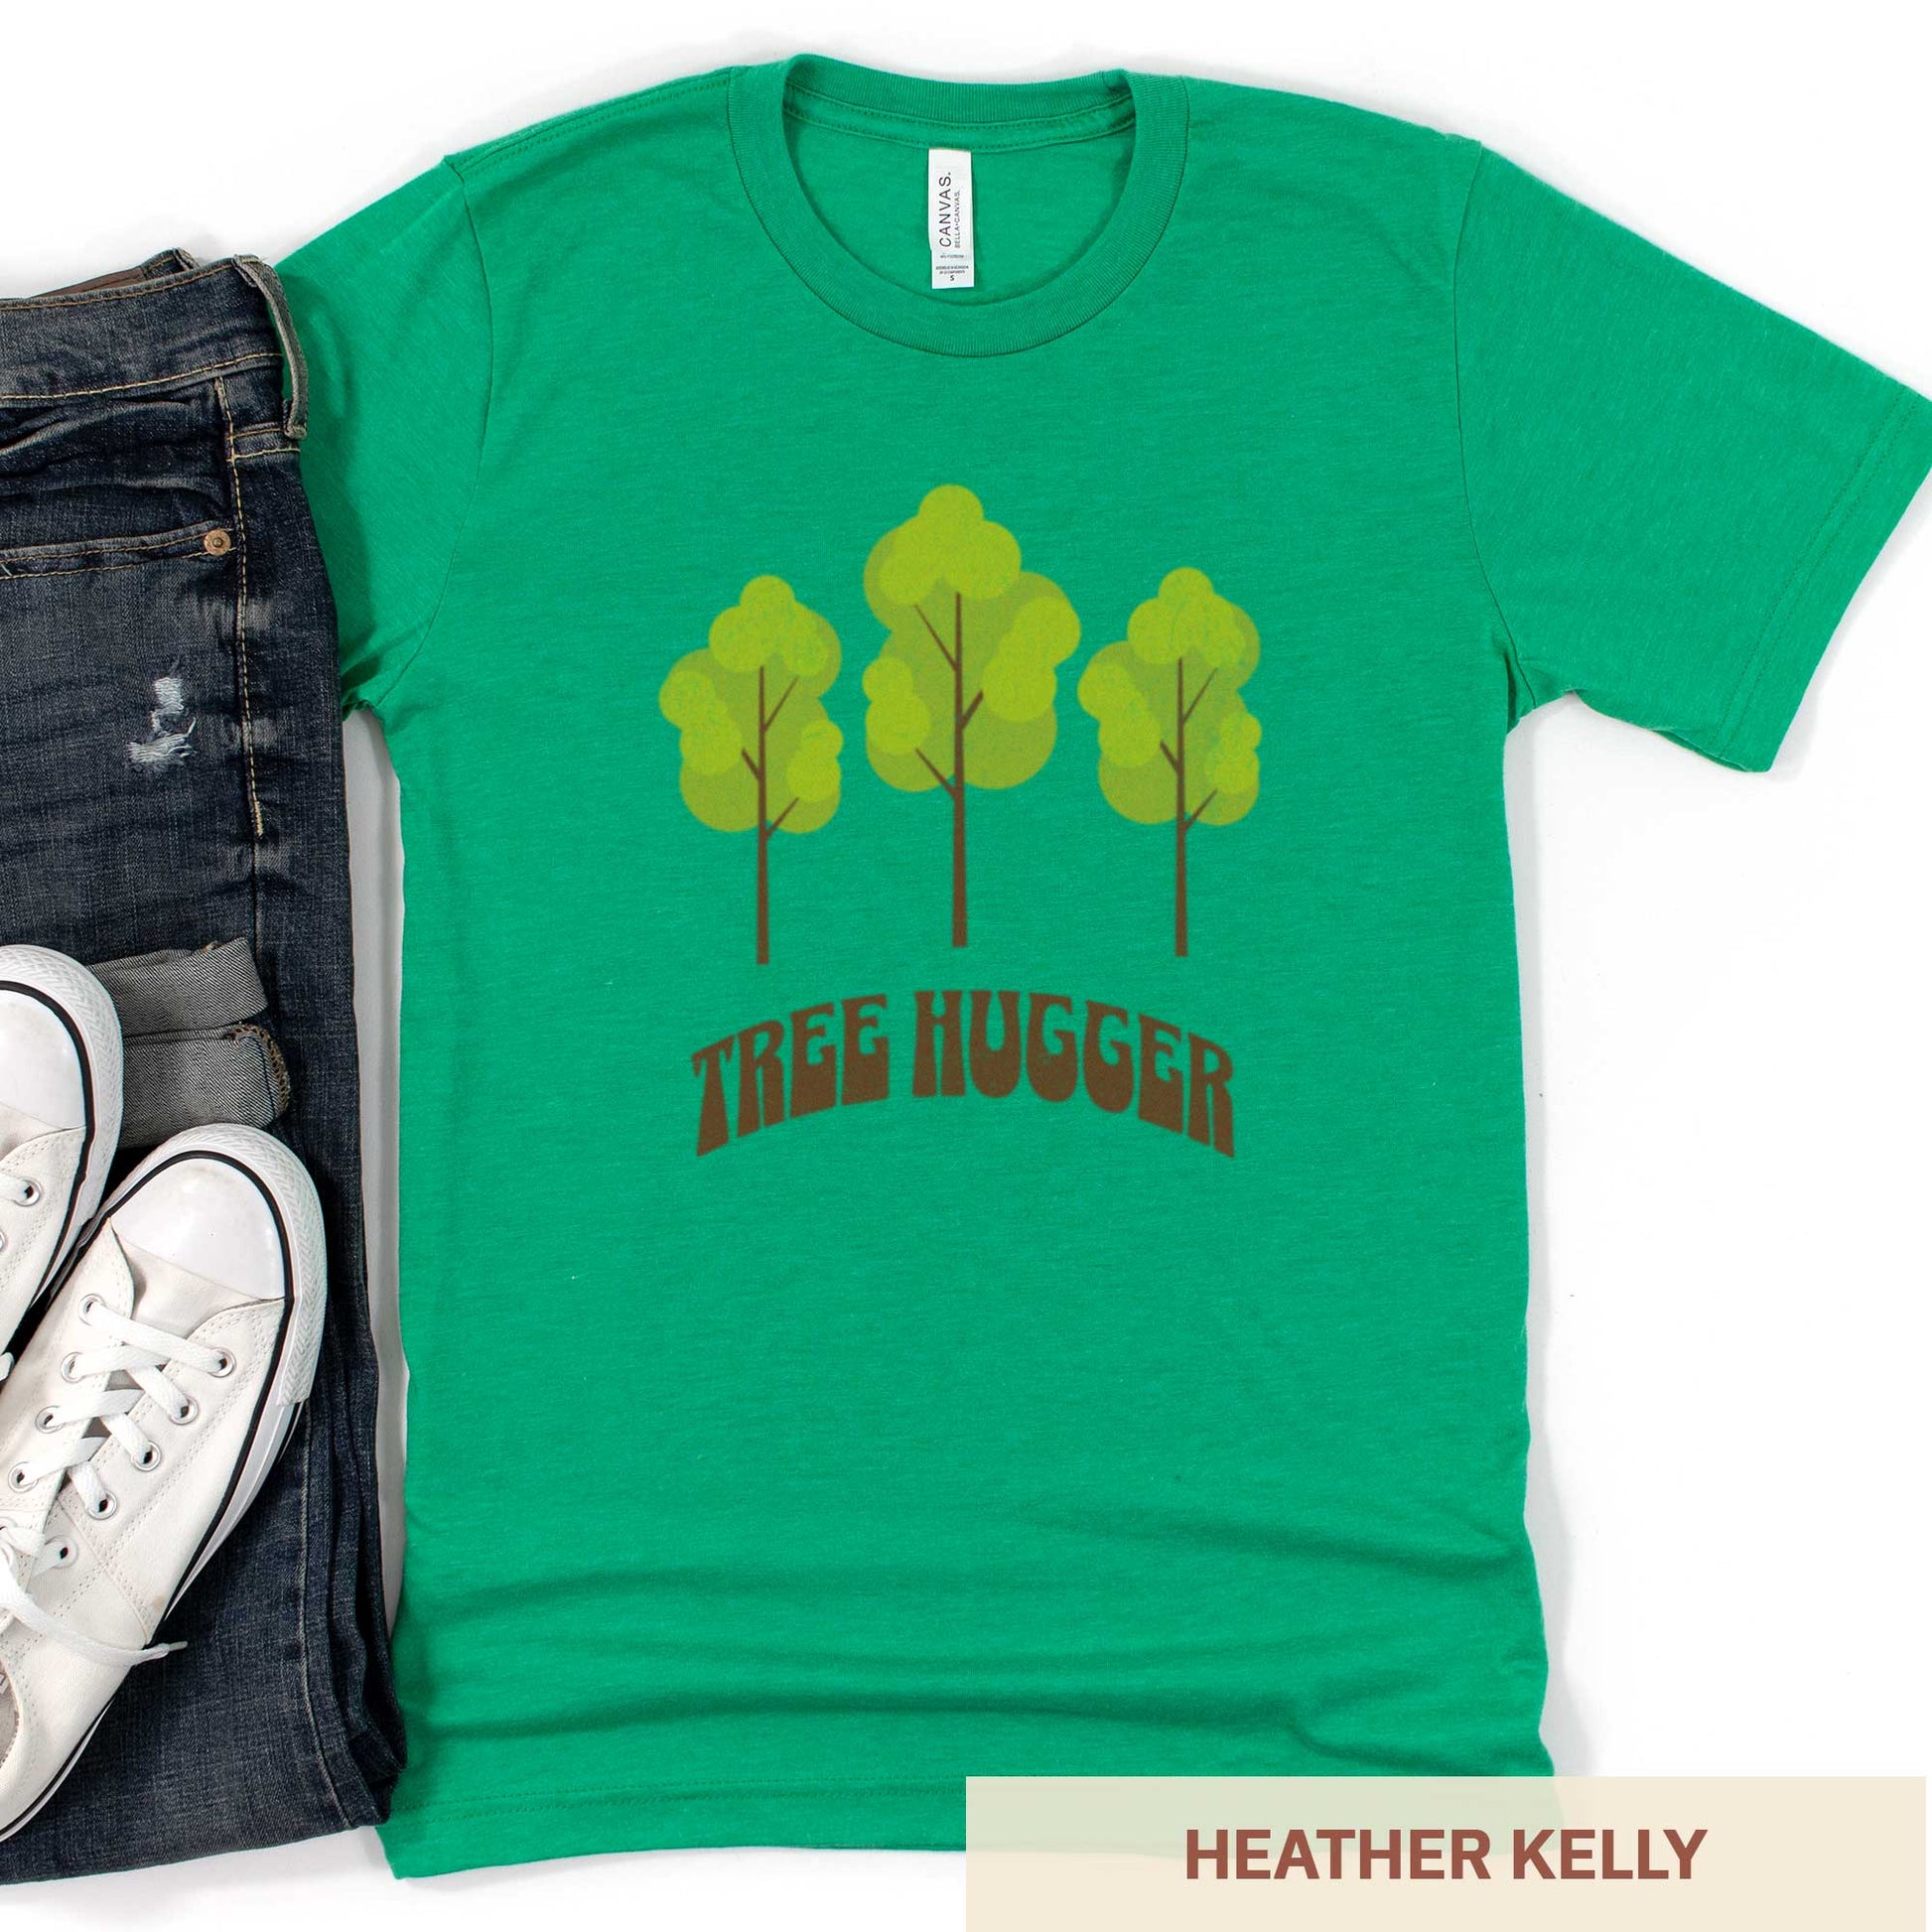 A heather kelly Bella Canvas t-shirt featuring three trees and the words tree hugger.